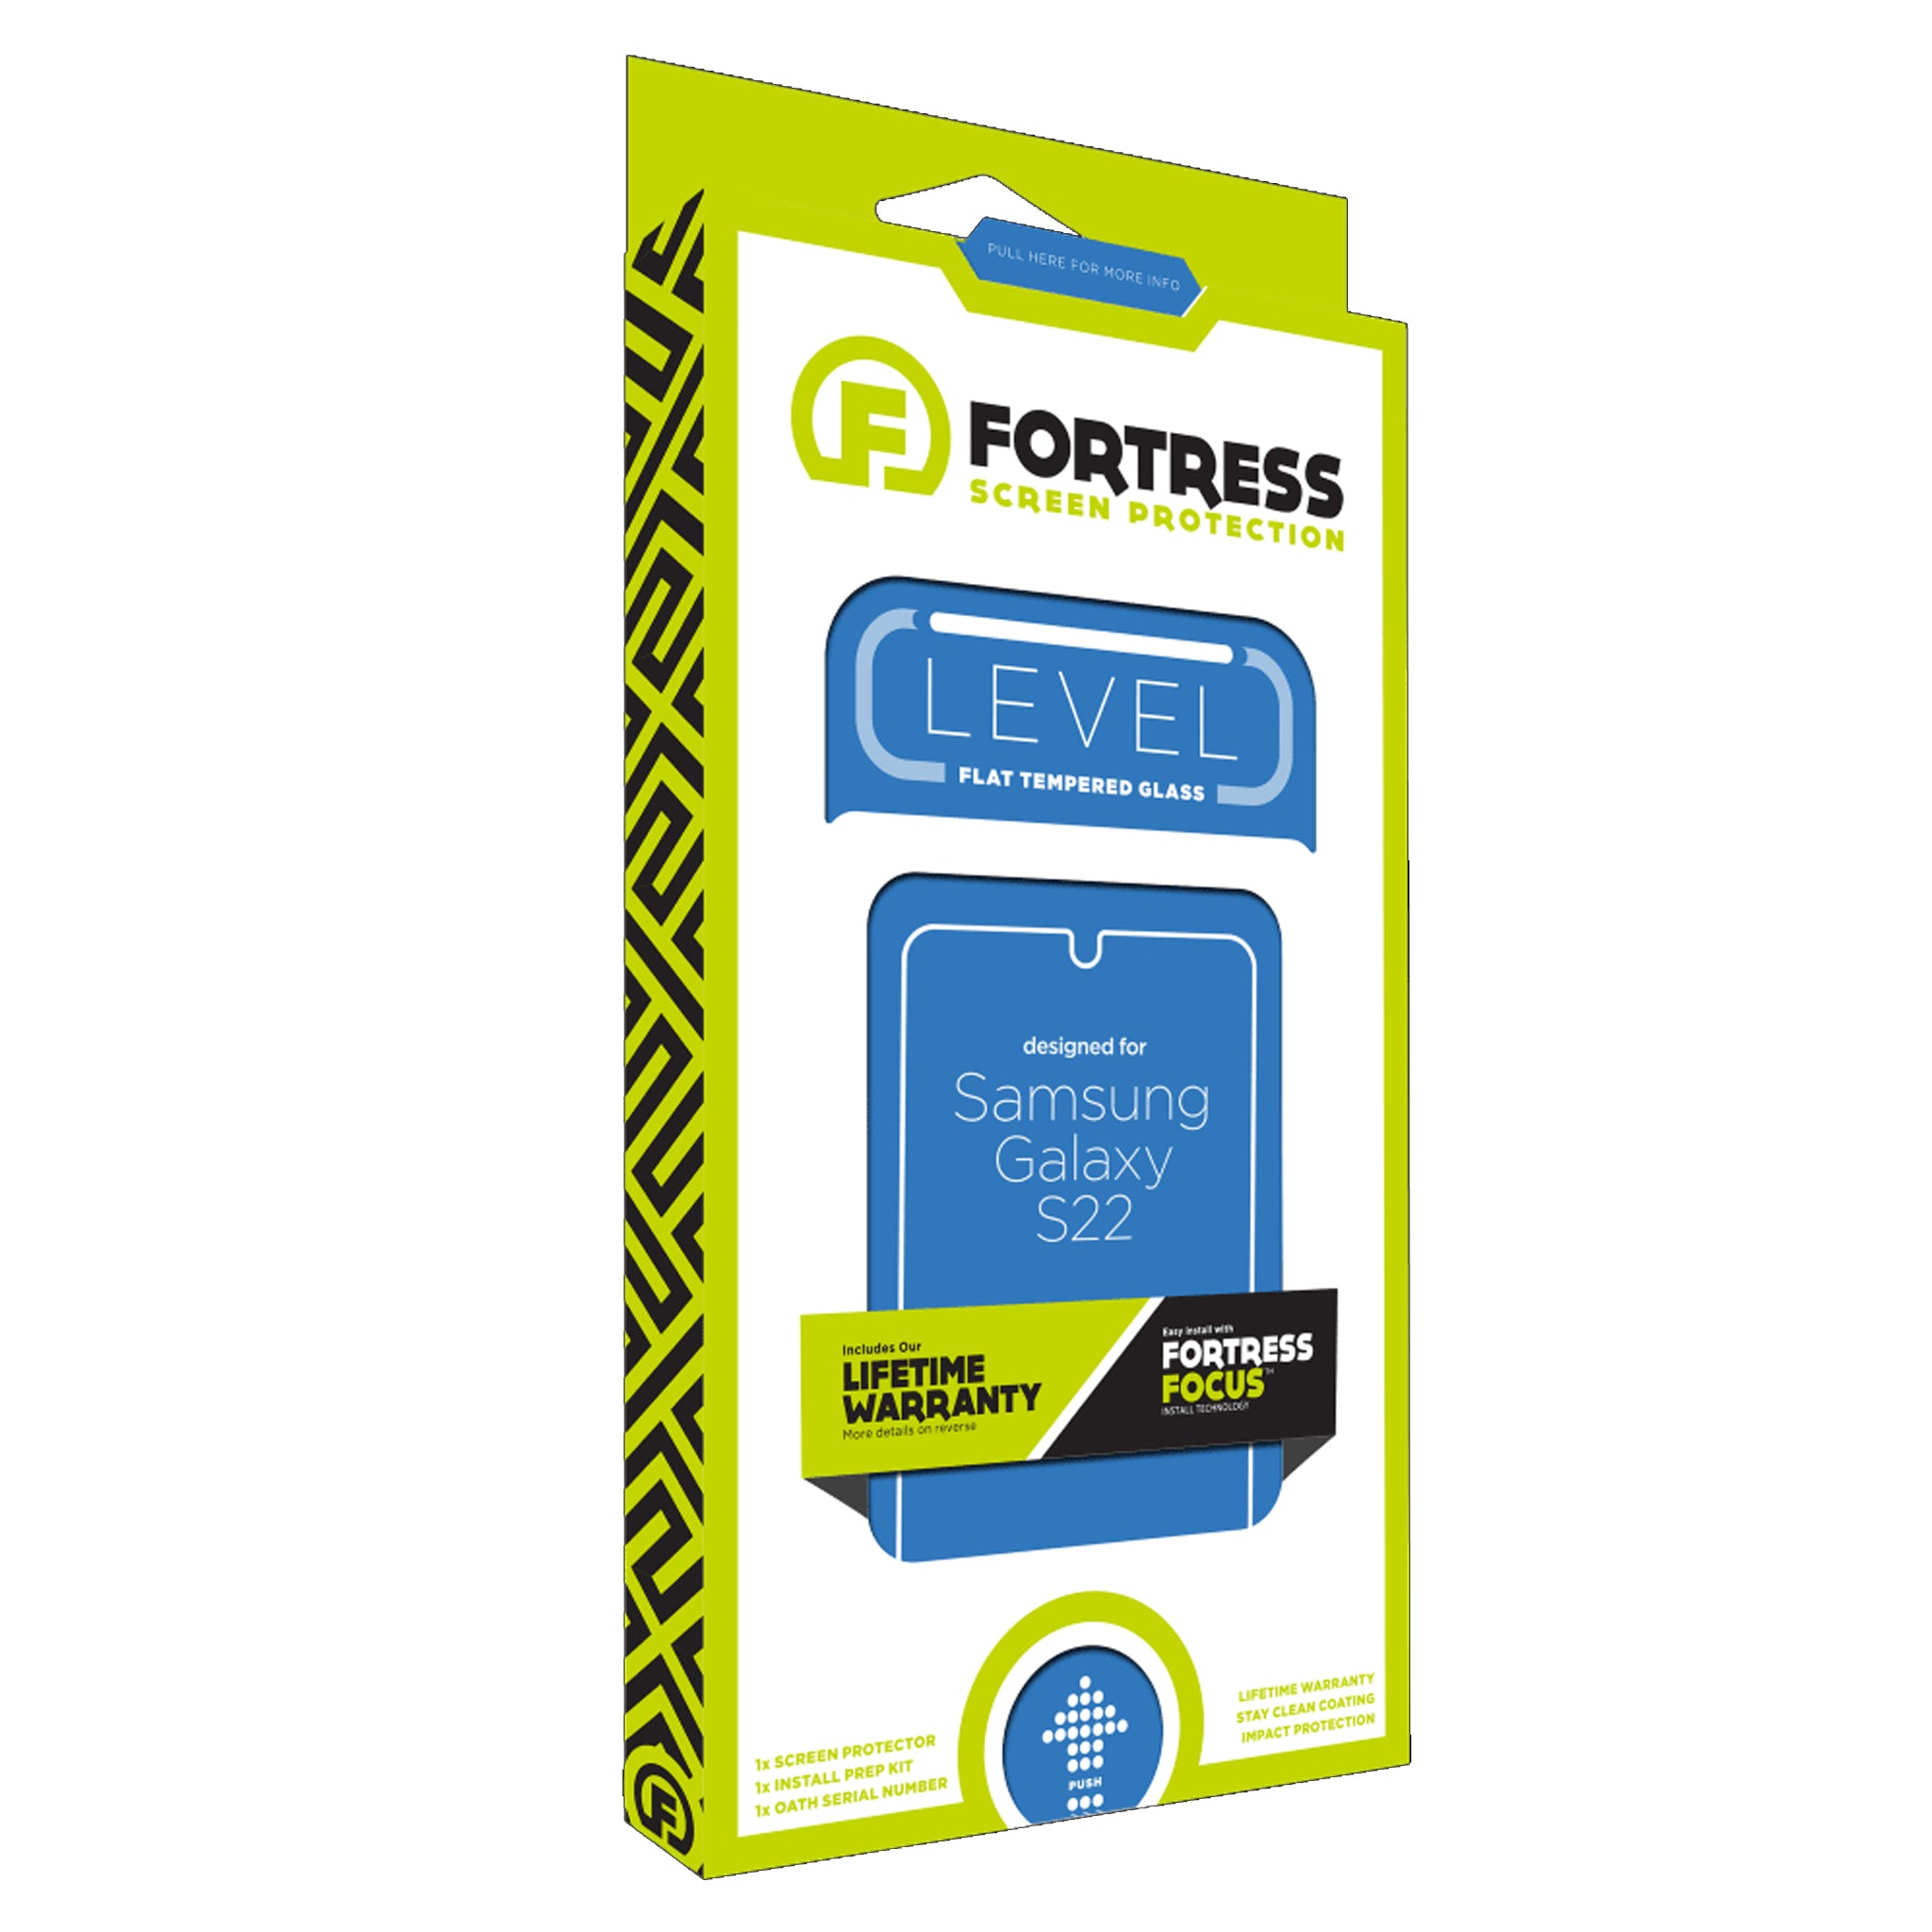 Fortress - Level Focus Glass Screen Protector For Samsung Galaxy S22 - Clear